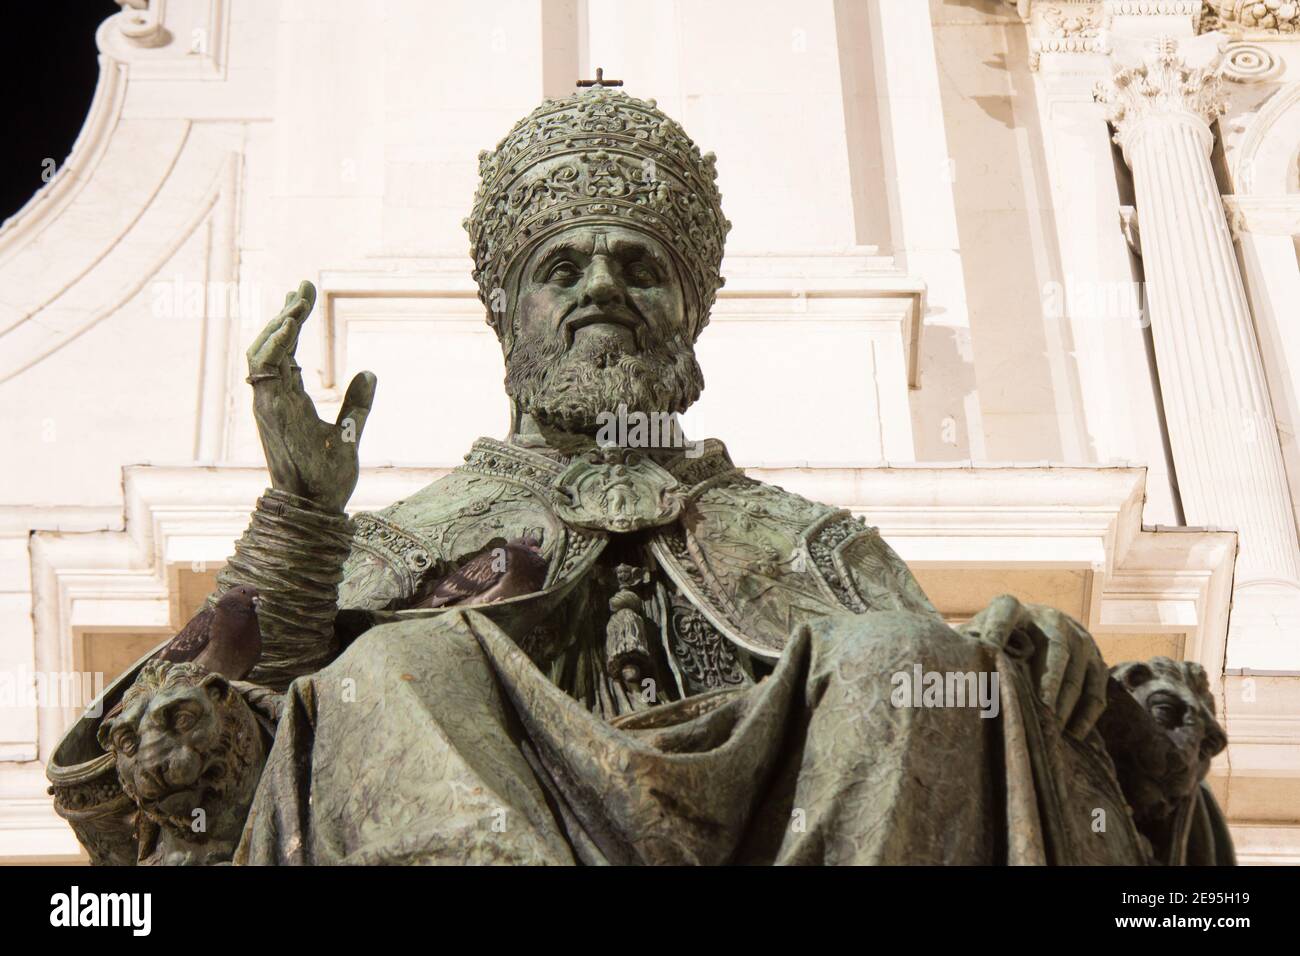 Loreto, Marche, province of Ancona:August 22,2020 View of the monument to Pope Sixtus V, the blessing of the bronze statue from the chair and the Stock Photo